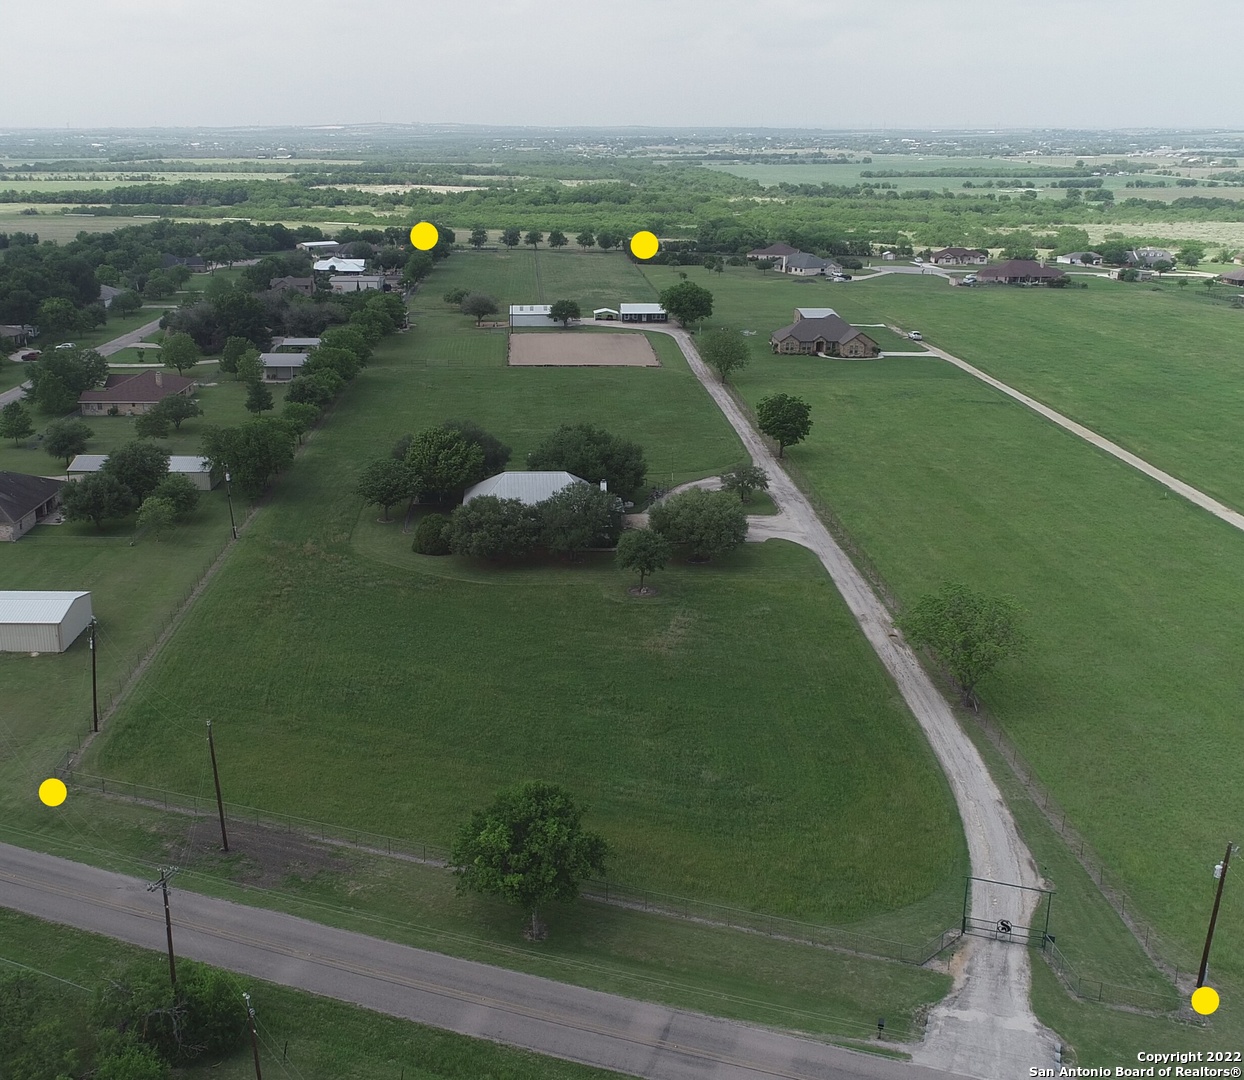 Horse lover's dream property. 2 separate homes on 10 acres. Immaculate and meticulously maintained with everything a person could want or need in highly desirable Marion TX located in Guadalupe County. 10 acres, 2 houses, 2 outbuildings/shops, 4 stall barn, arena, 3 pastures, and coastal fields used for hay production. Main house is 2893sqft and the guesthouse is a one bedroom 1080sqft home that is perfect for the parents. The barn has indoor/outdoor wash racks, large tack room and attached hay storage.